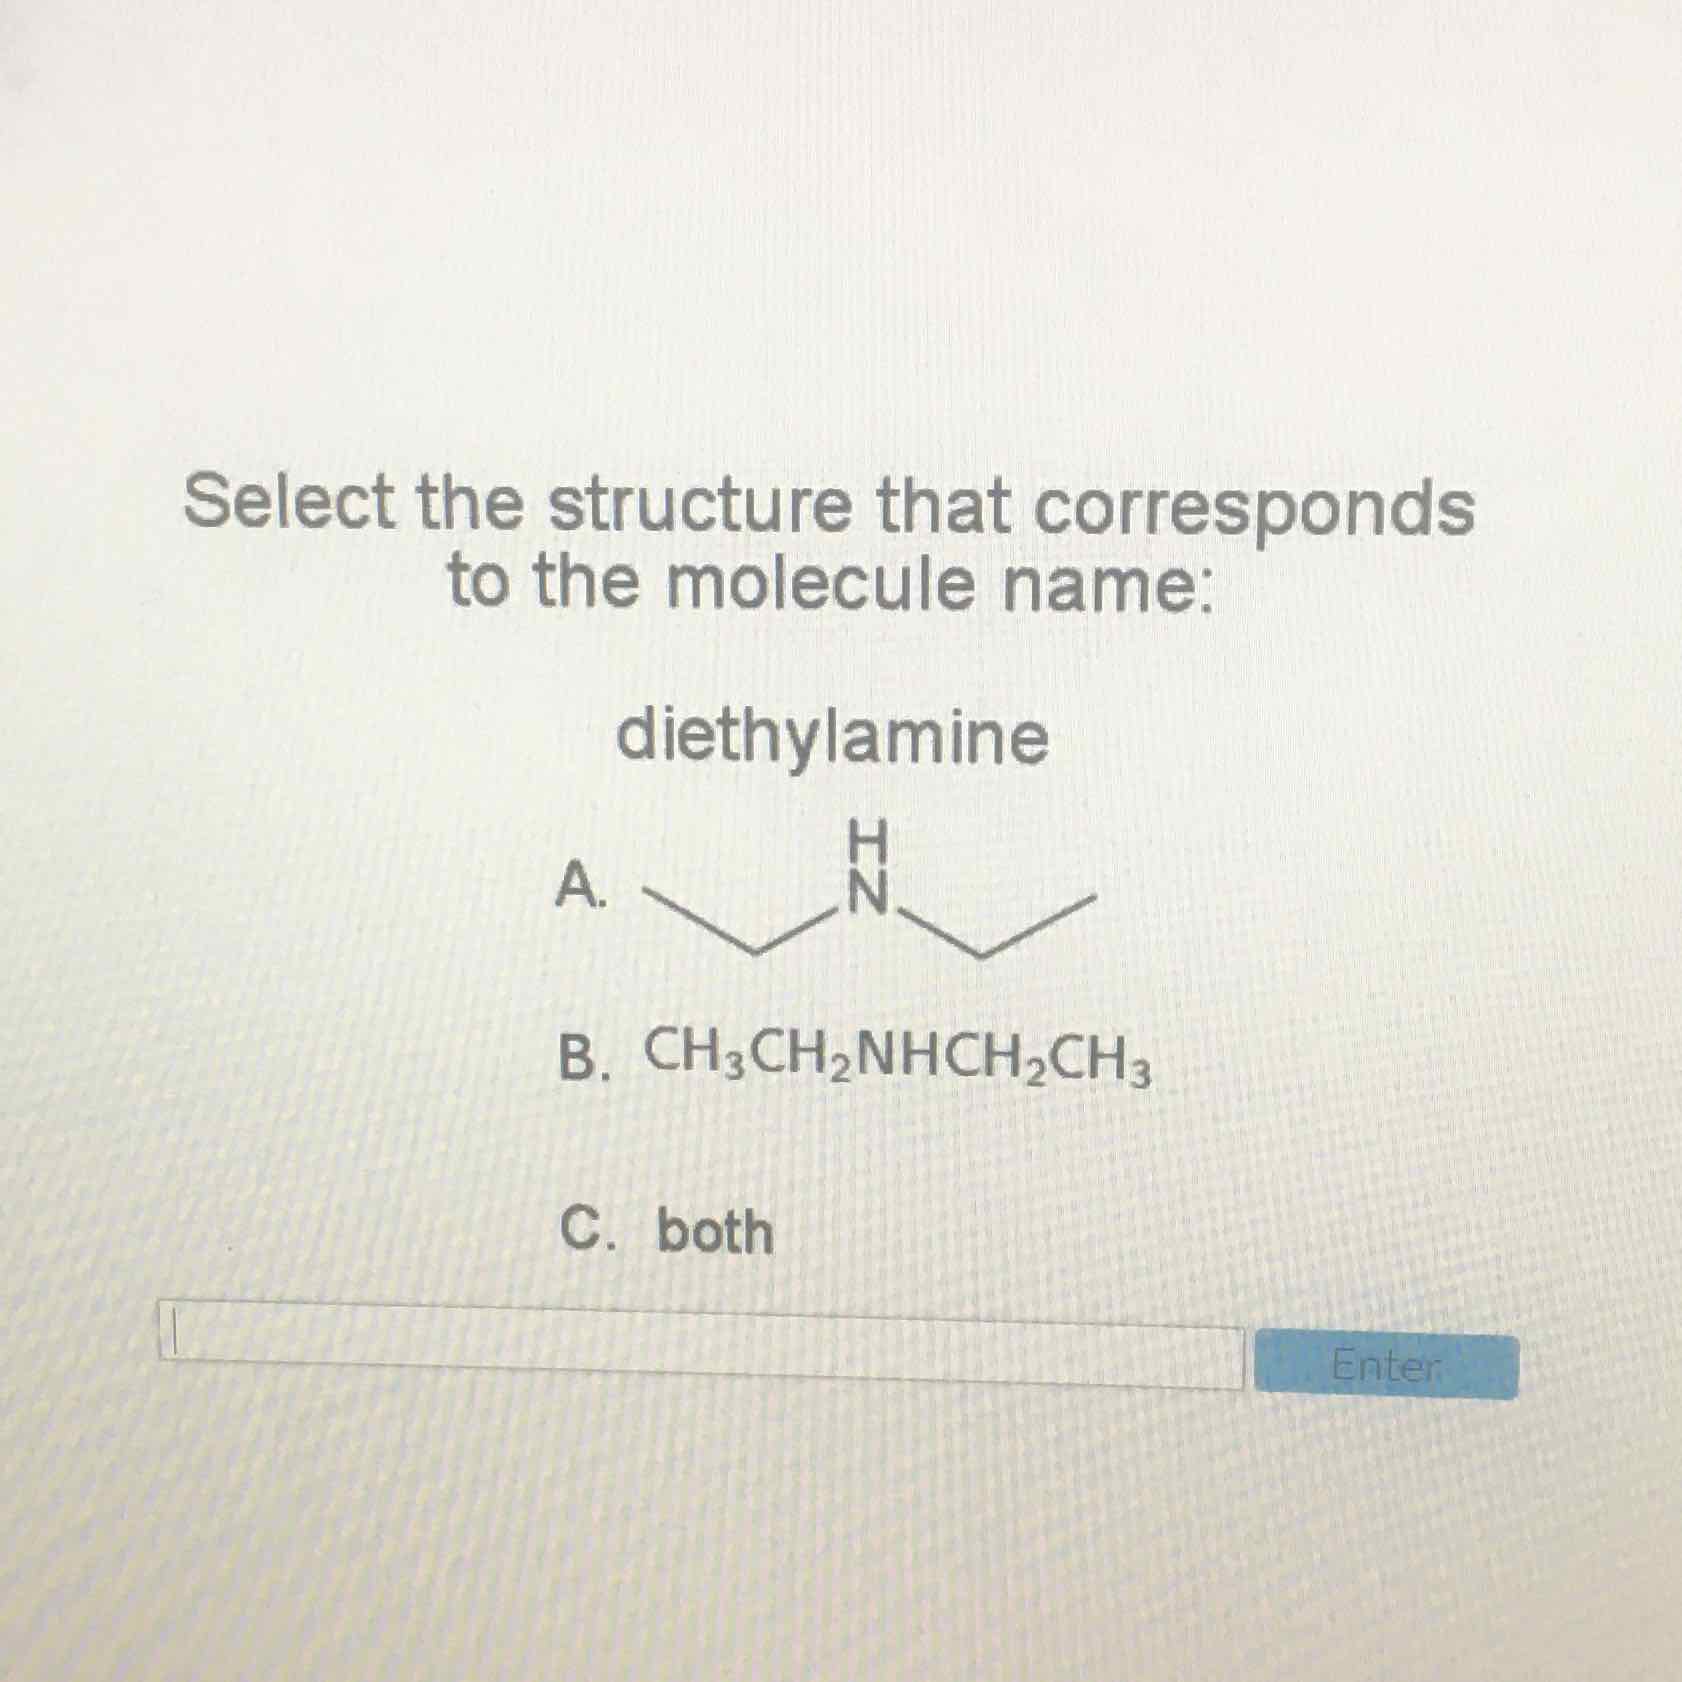 Select the structure that corresponds to the molecule name:
diethylamine
B. \( \mathrm{CH}_{3} \mathrm{CH}_{2} \mathrm{NHCH}_{2} \mathrm{CH}_{3} \)
C. both